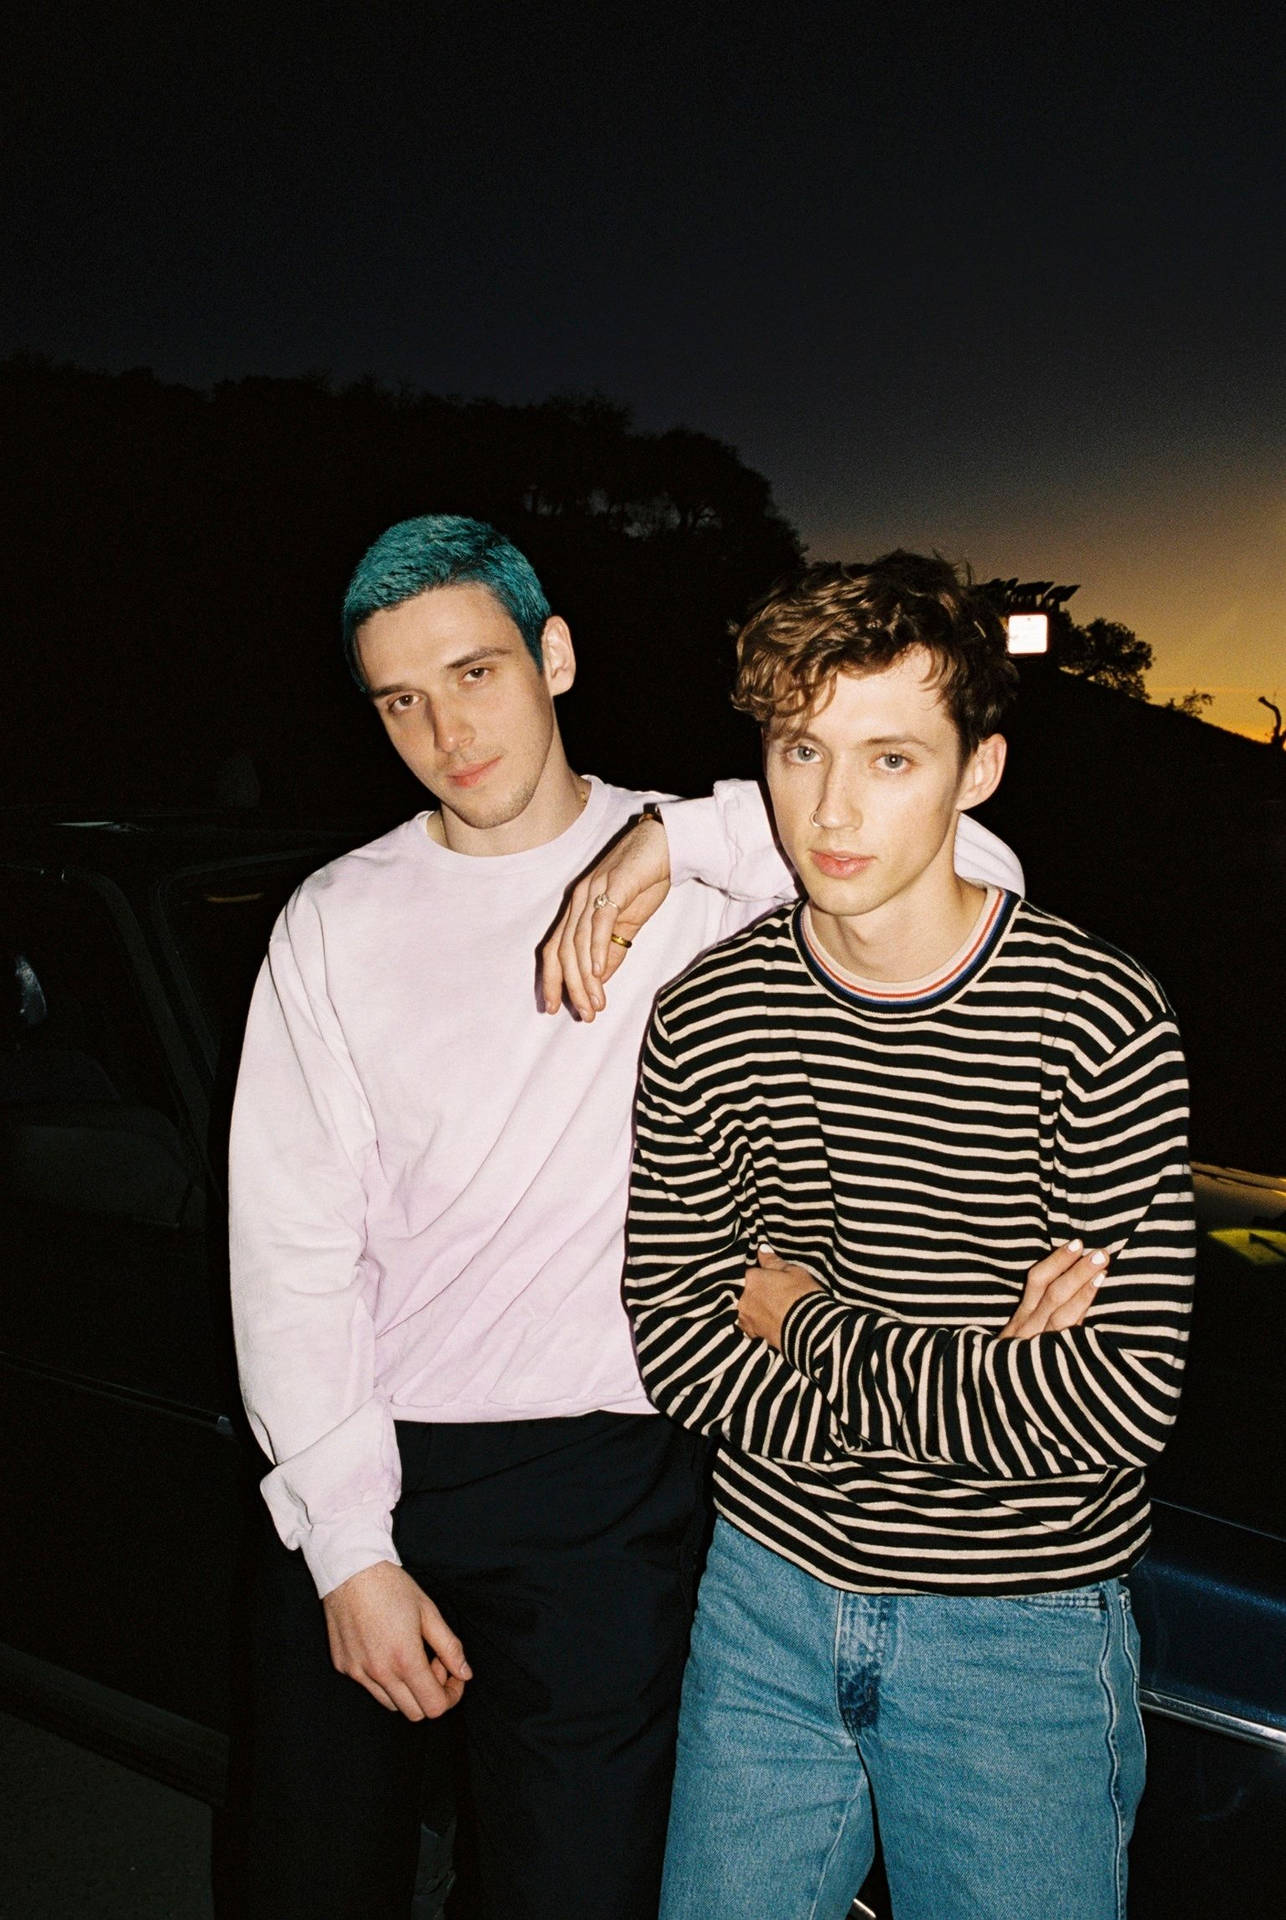 Troye Sivan And Lauv Posing In A Candid Shot For Their Hit Collaboration, 